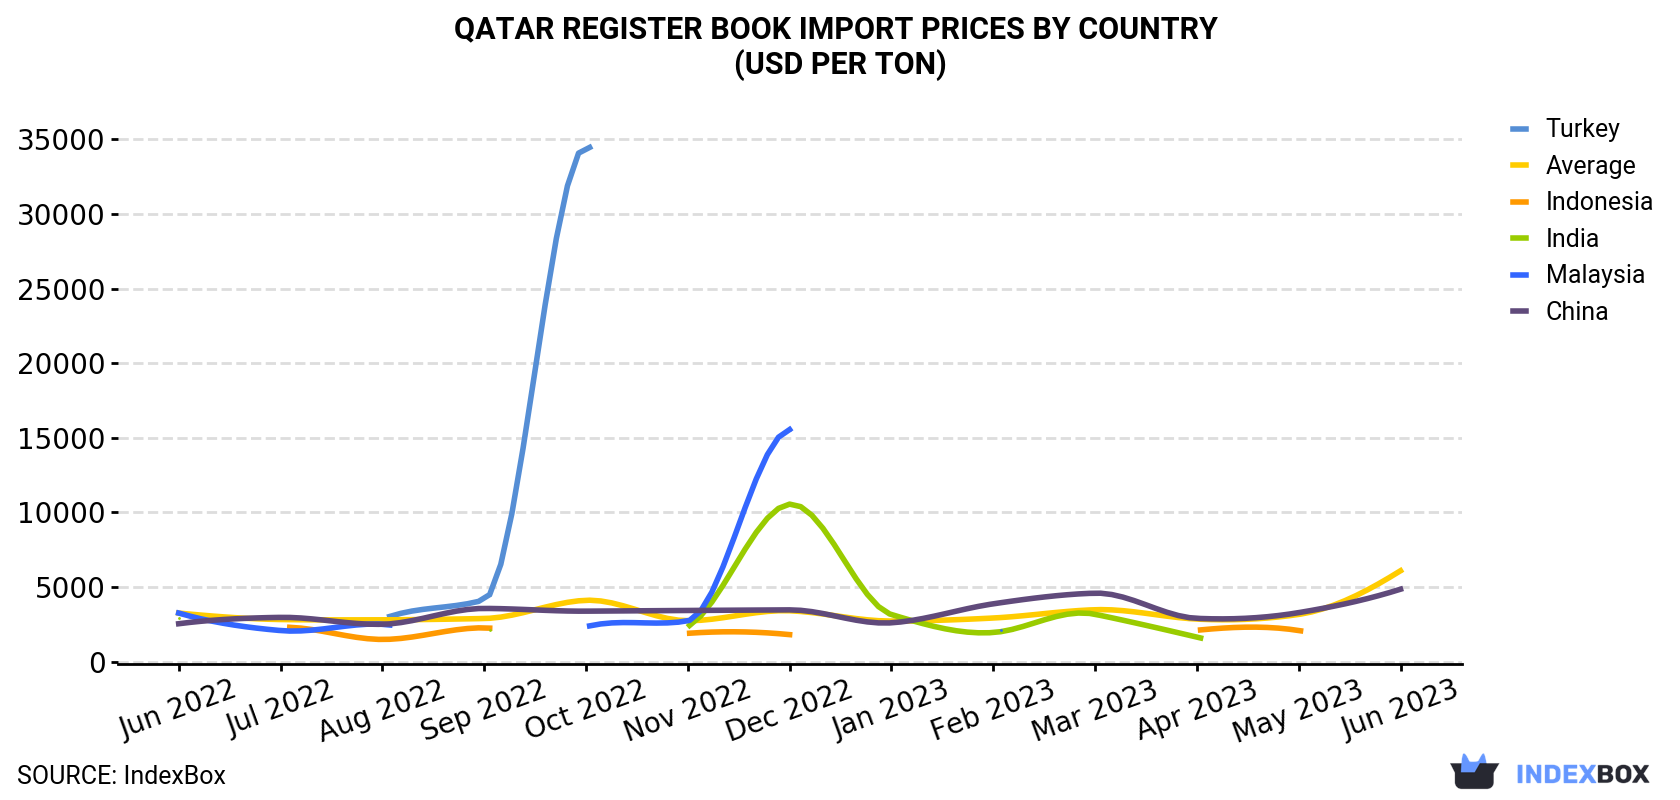 Qatar Register Book Import Prices By Country (USD Per Ton)